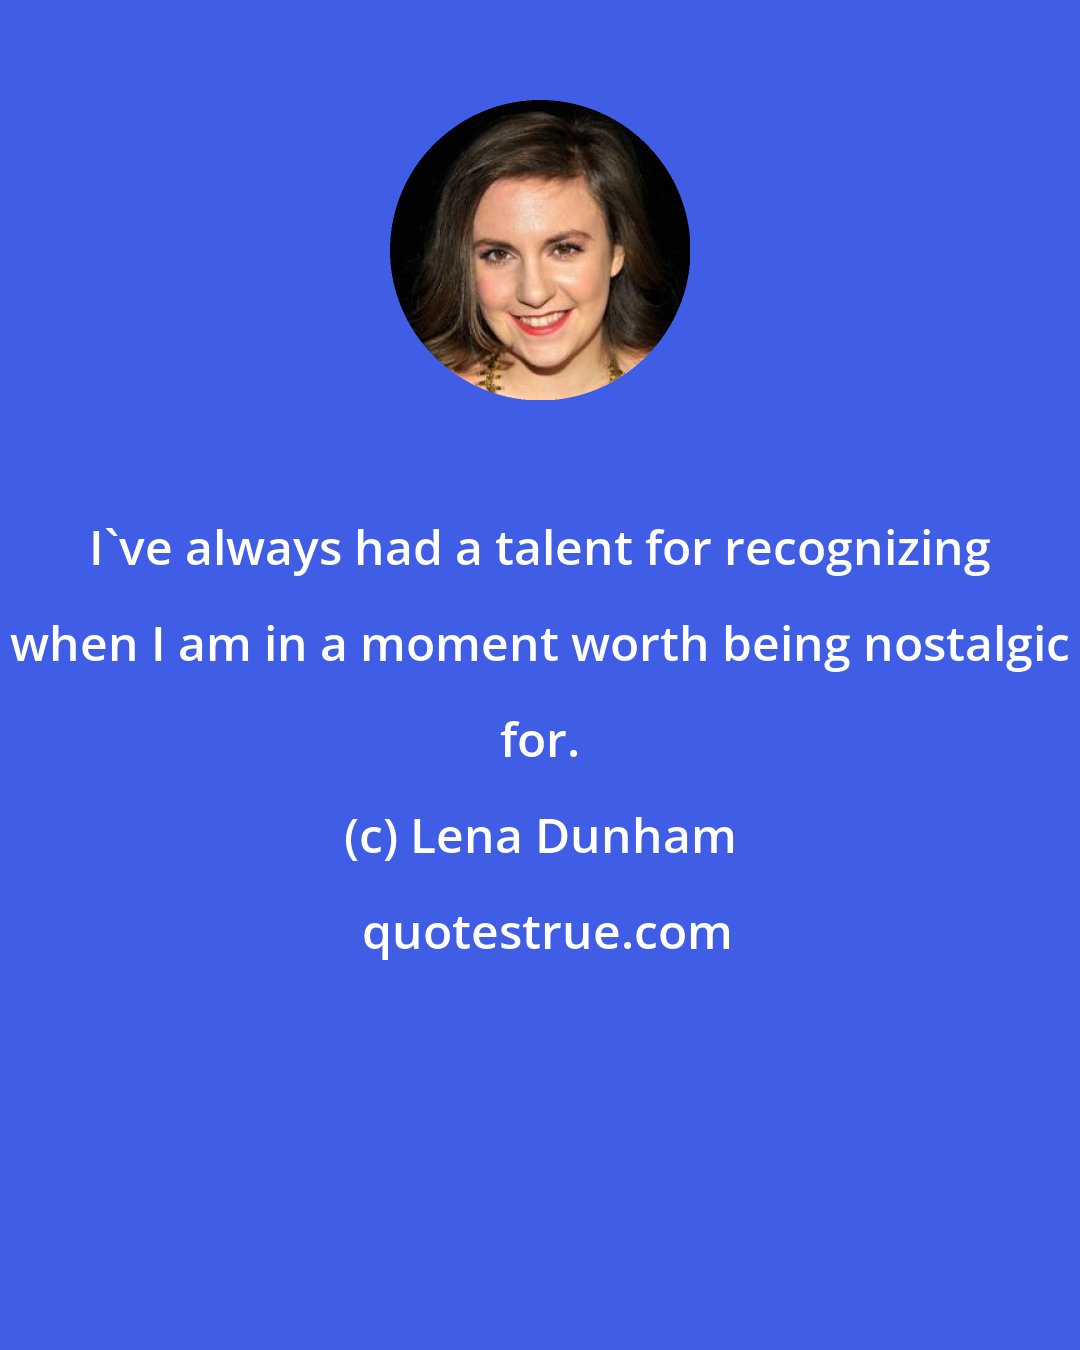 Lena Dunham: I've always had a talent for recognizing when I am in a moment worth being nostalgic for.